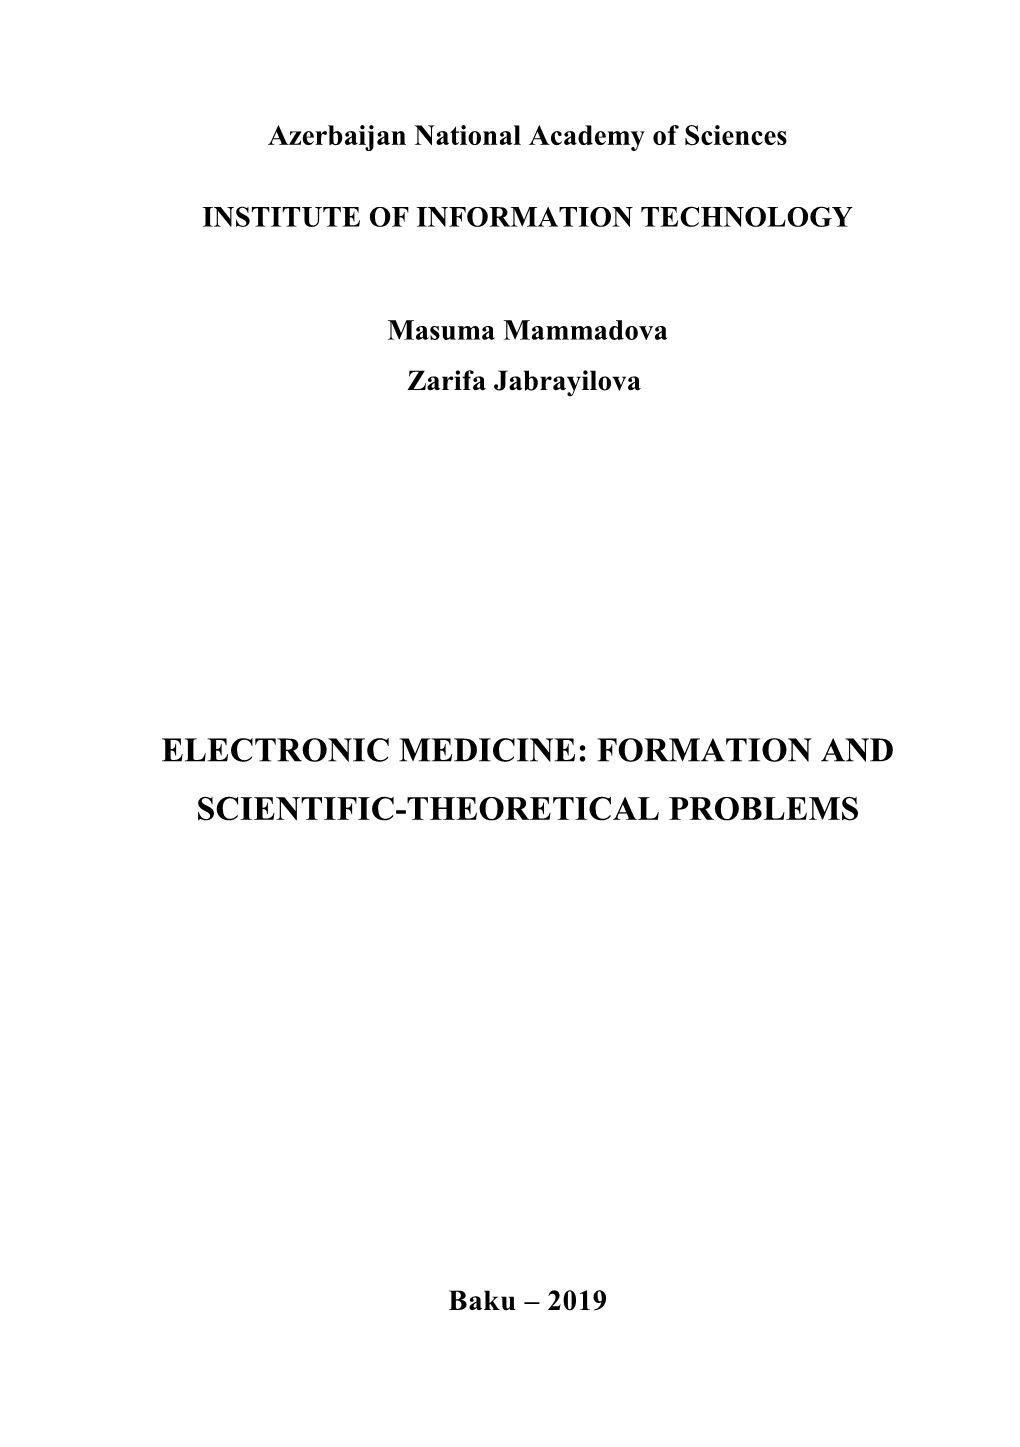 Electronic Medicine: Formation and Scientific-Theoretical Problems